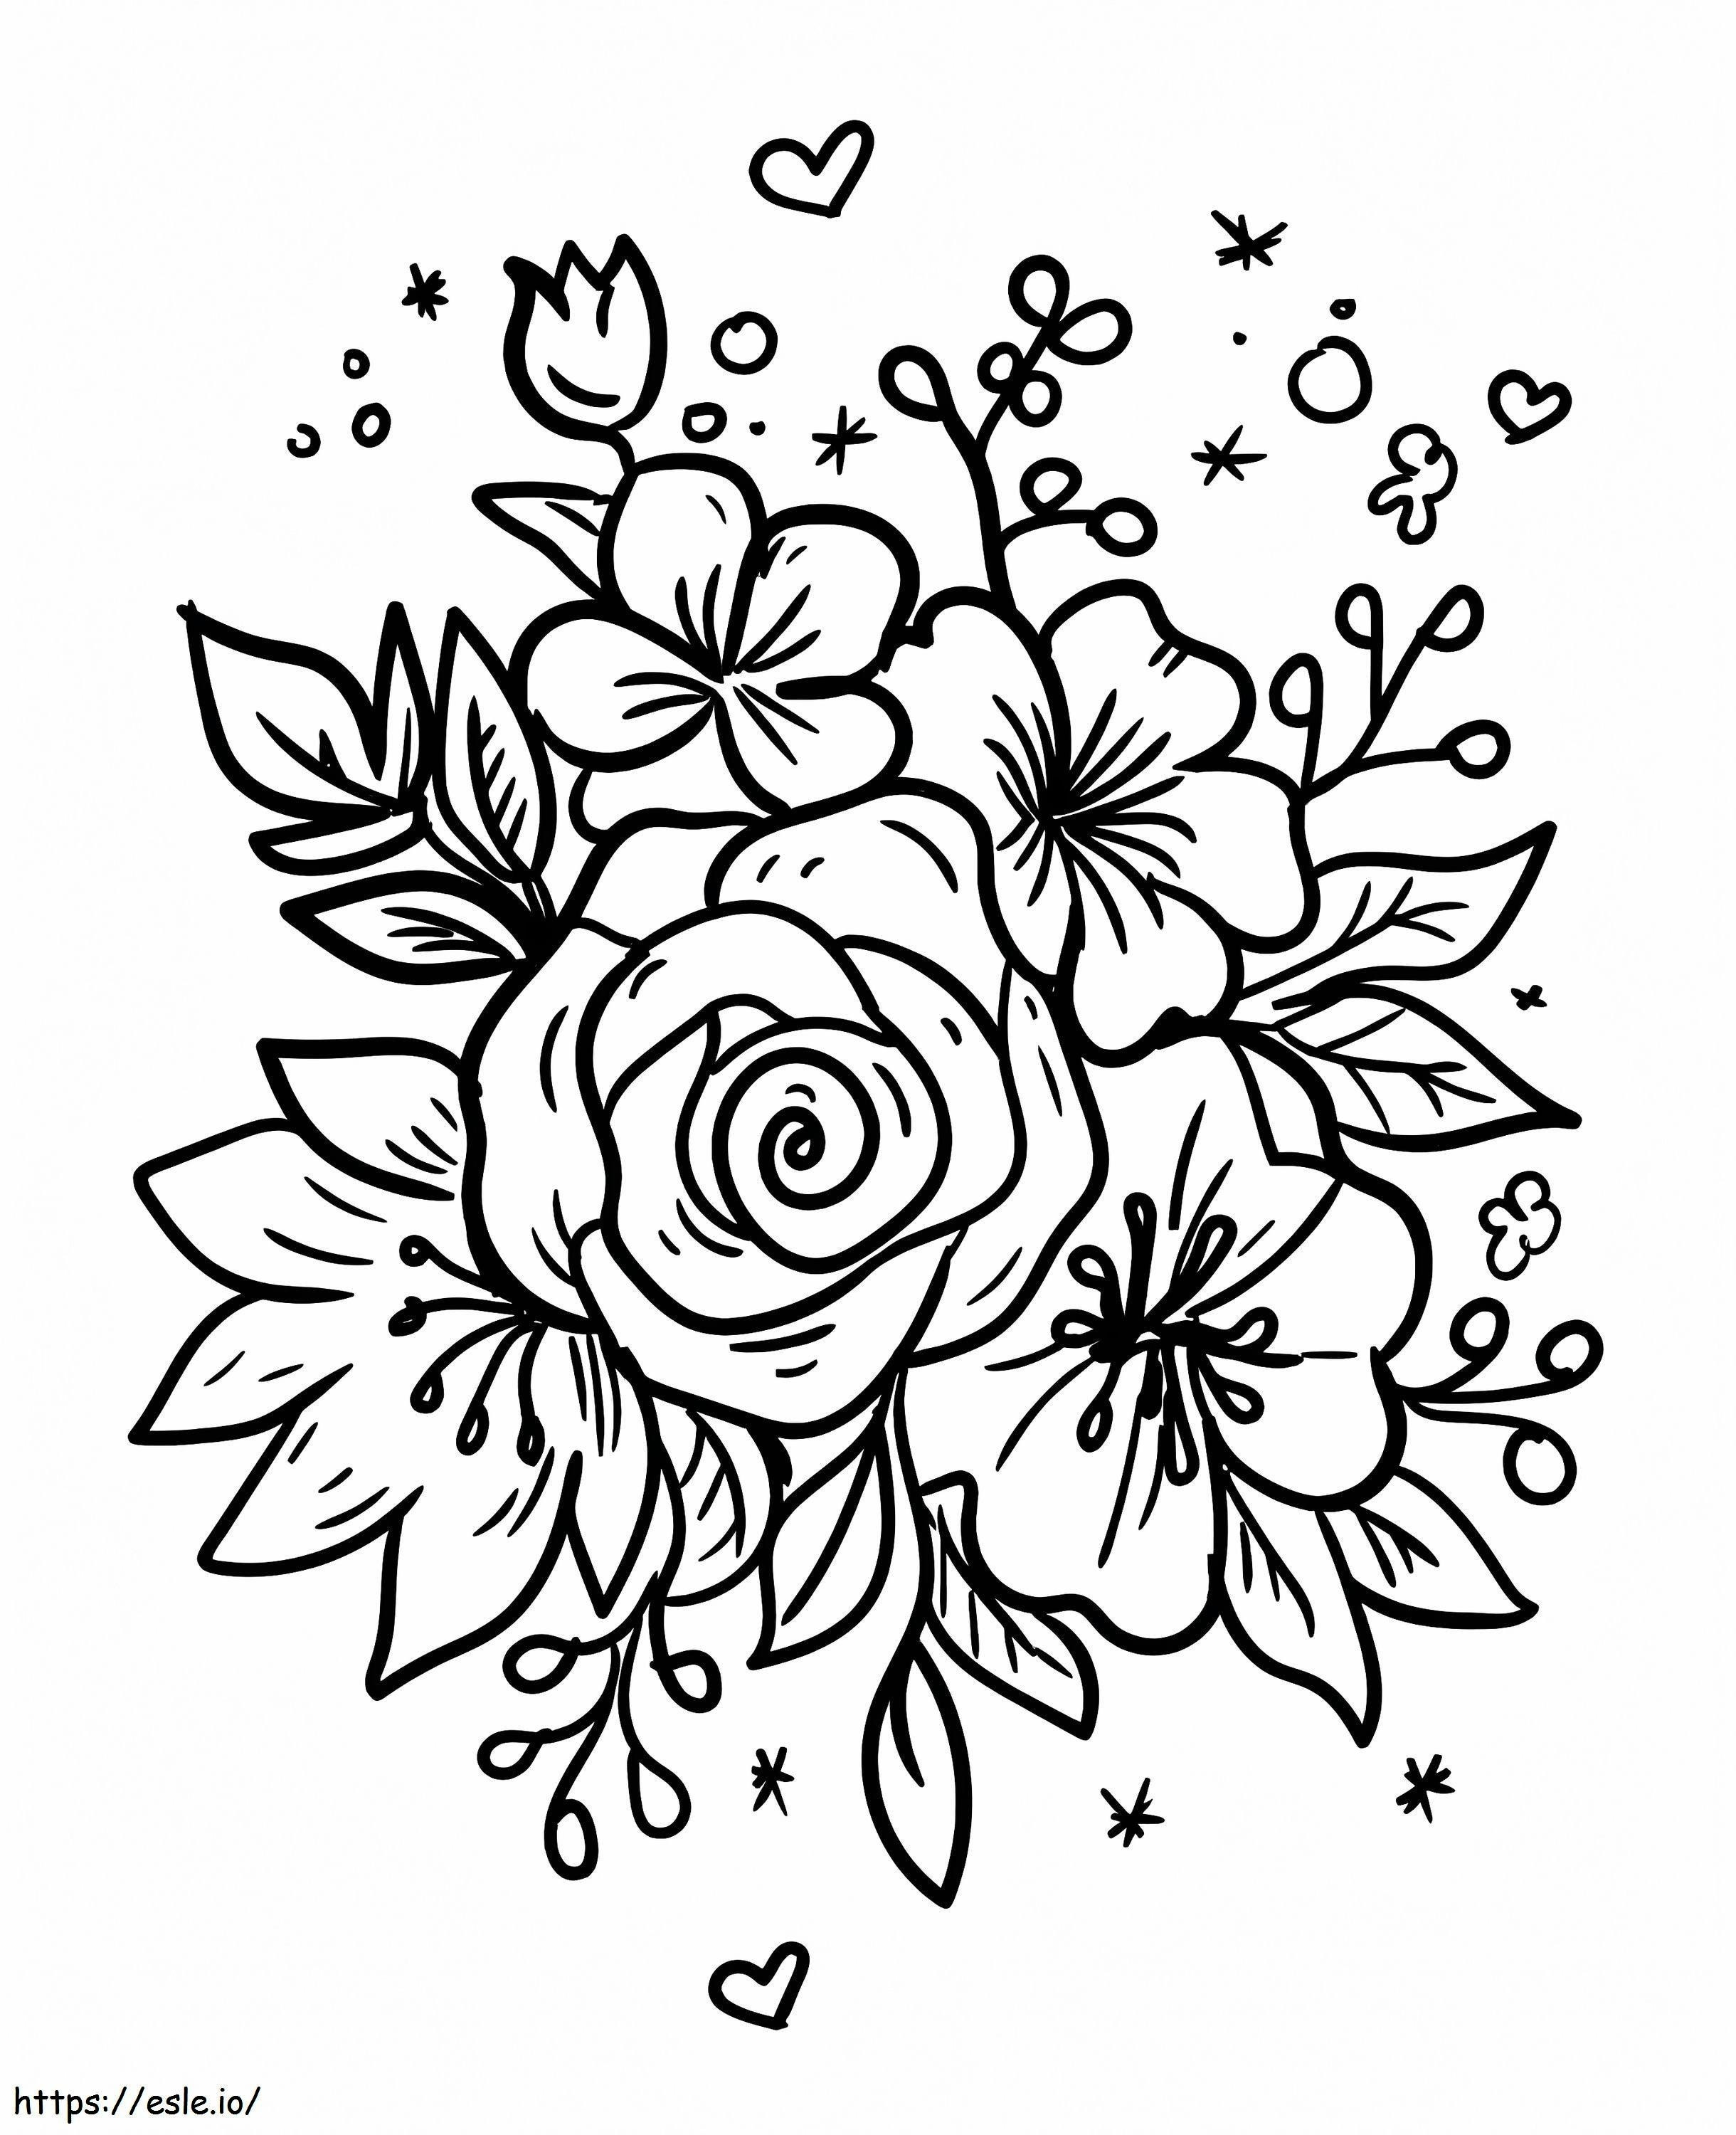 Lovely Flower Bouquet coloring page